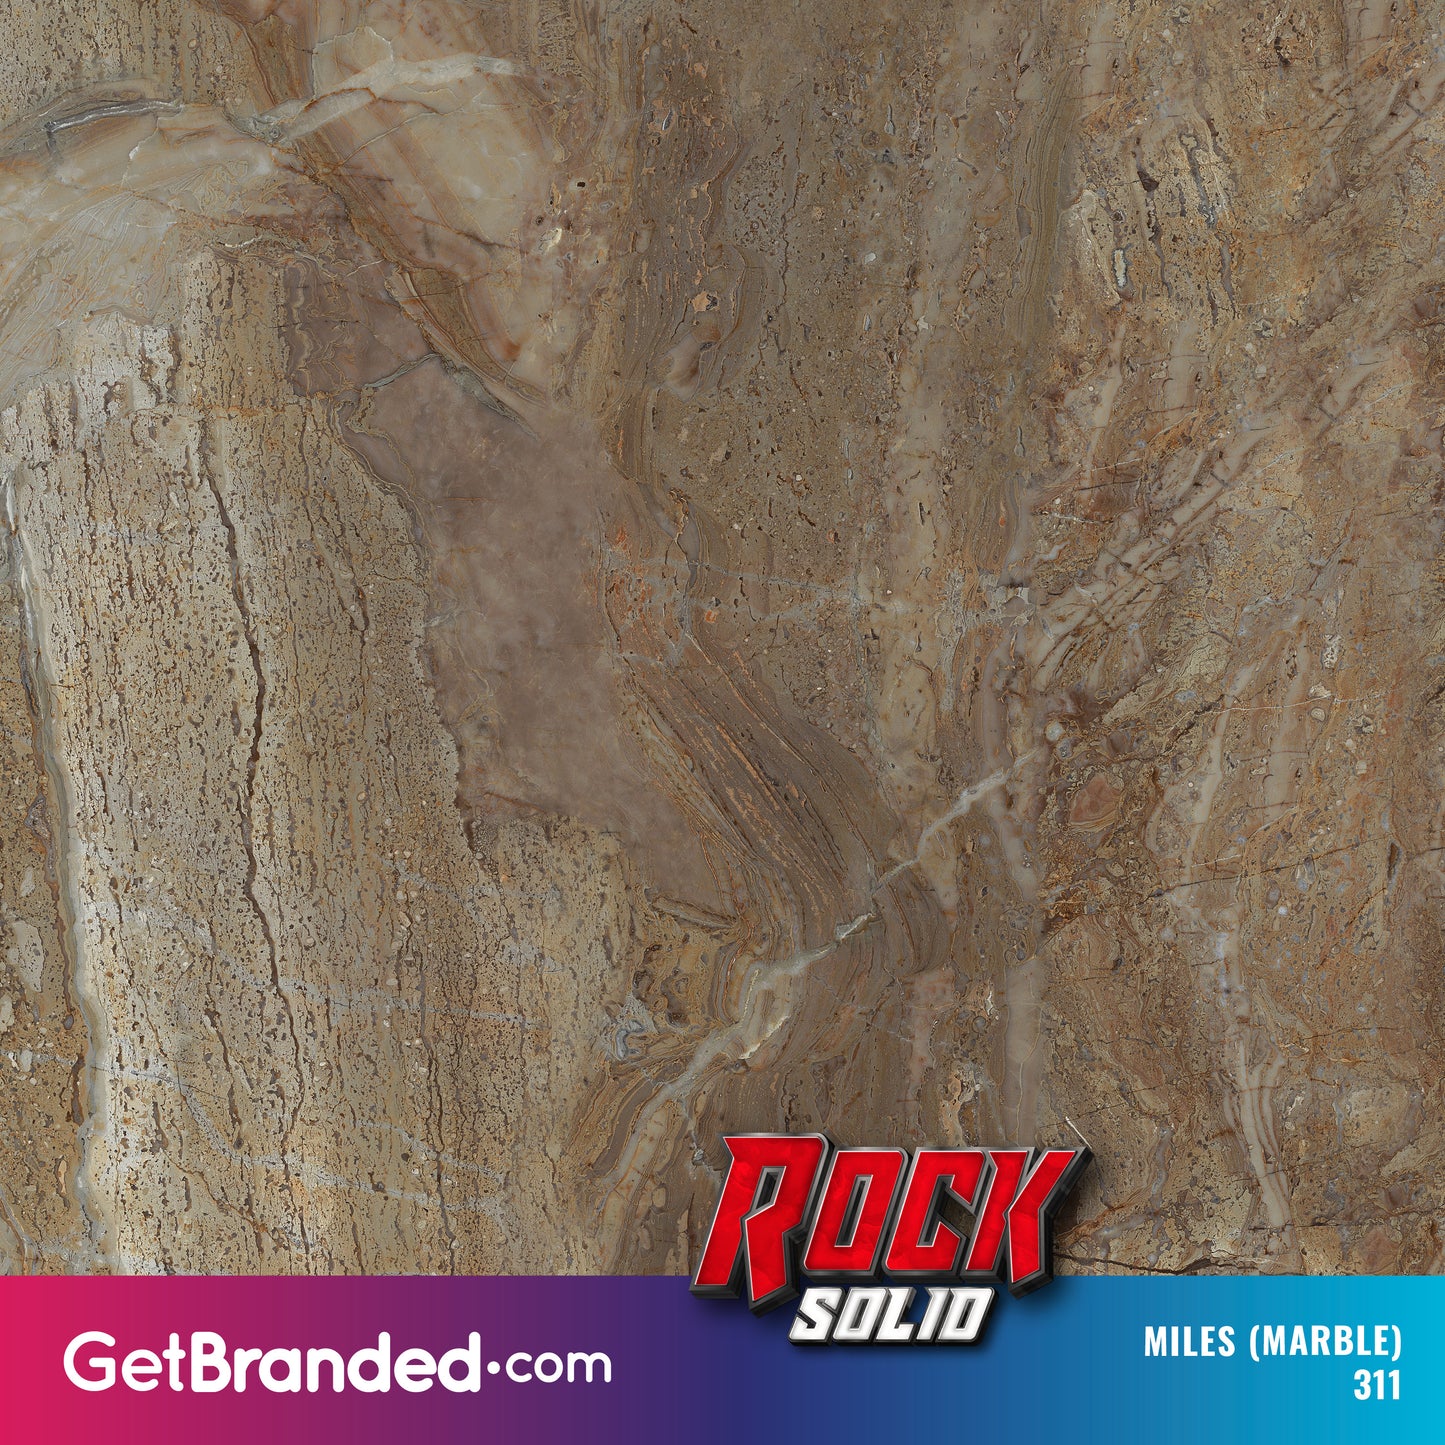 Miles Marble RockSolid™ Wrap Pattern Image.